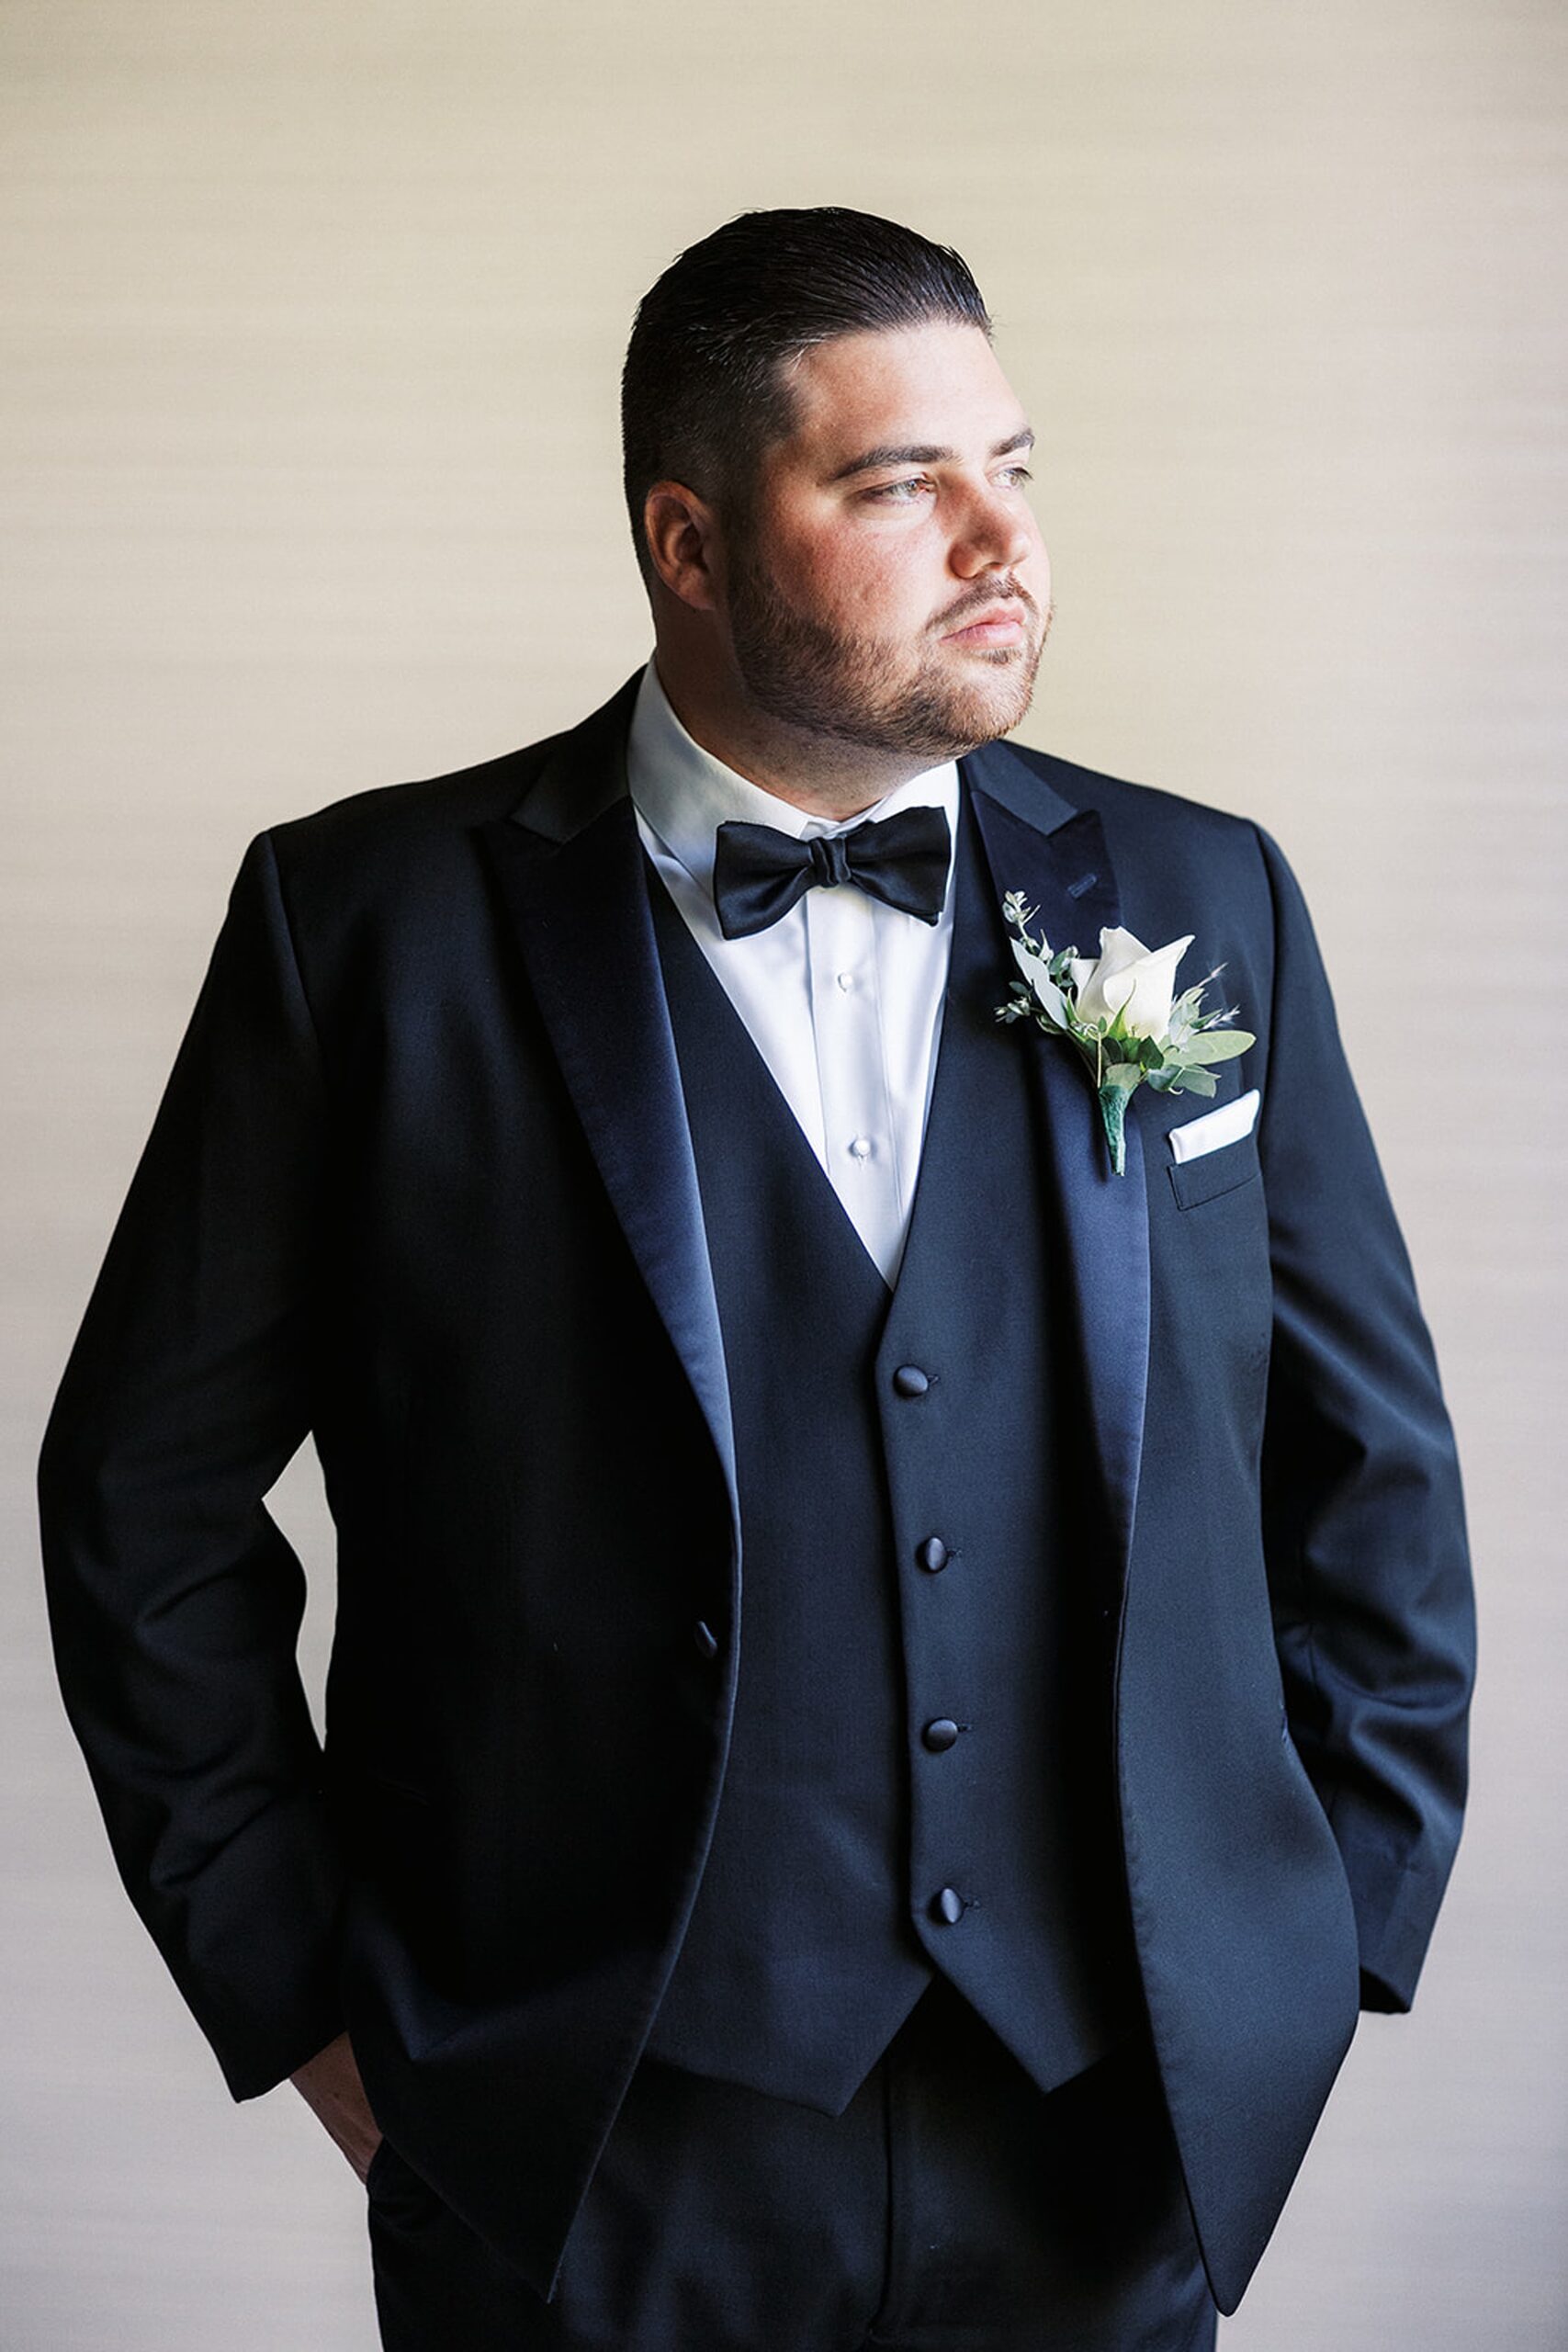 A groom stands with hands in his pockets while standing and looking out a window in a black tuxedo